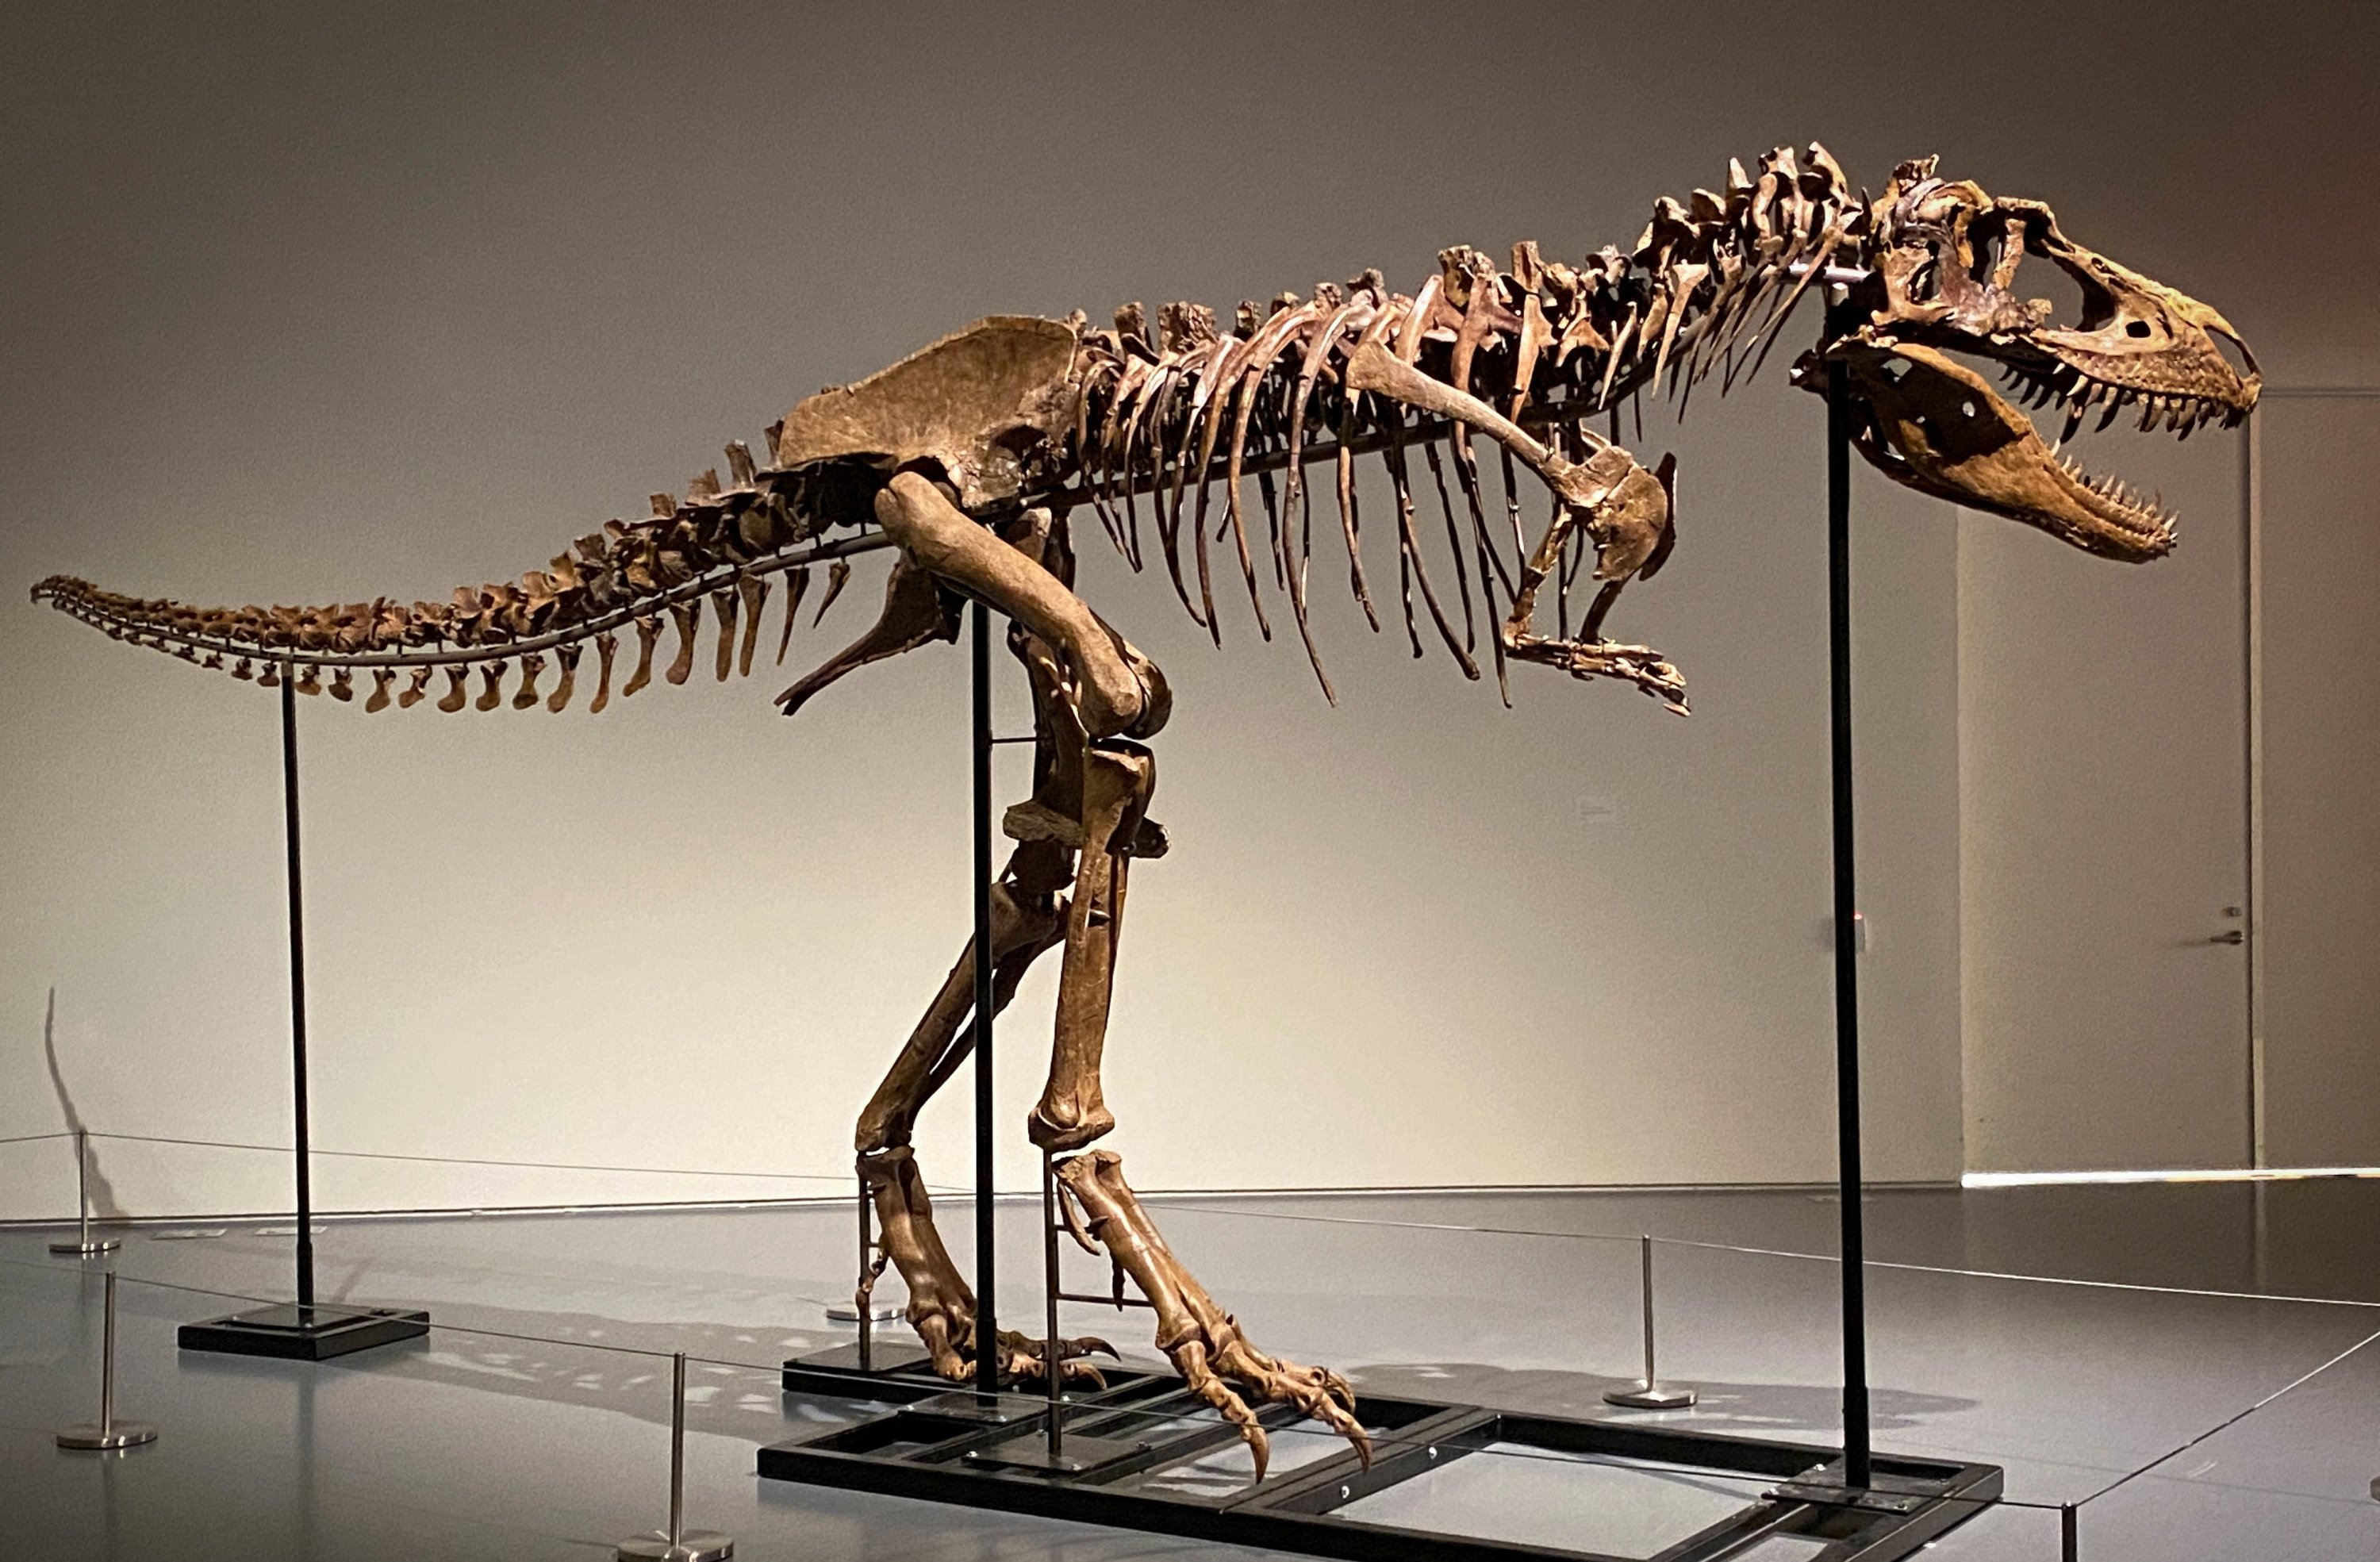 A recently discovered skeleton of a Gorgosaurus dinosaur goes on display ahead of the auction by Sotheby's in New York City, U.S., July 5, 2022. (REUTERS Photo)